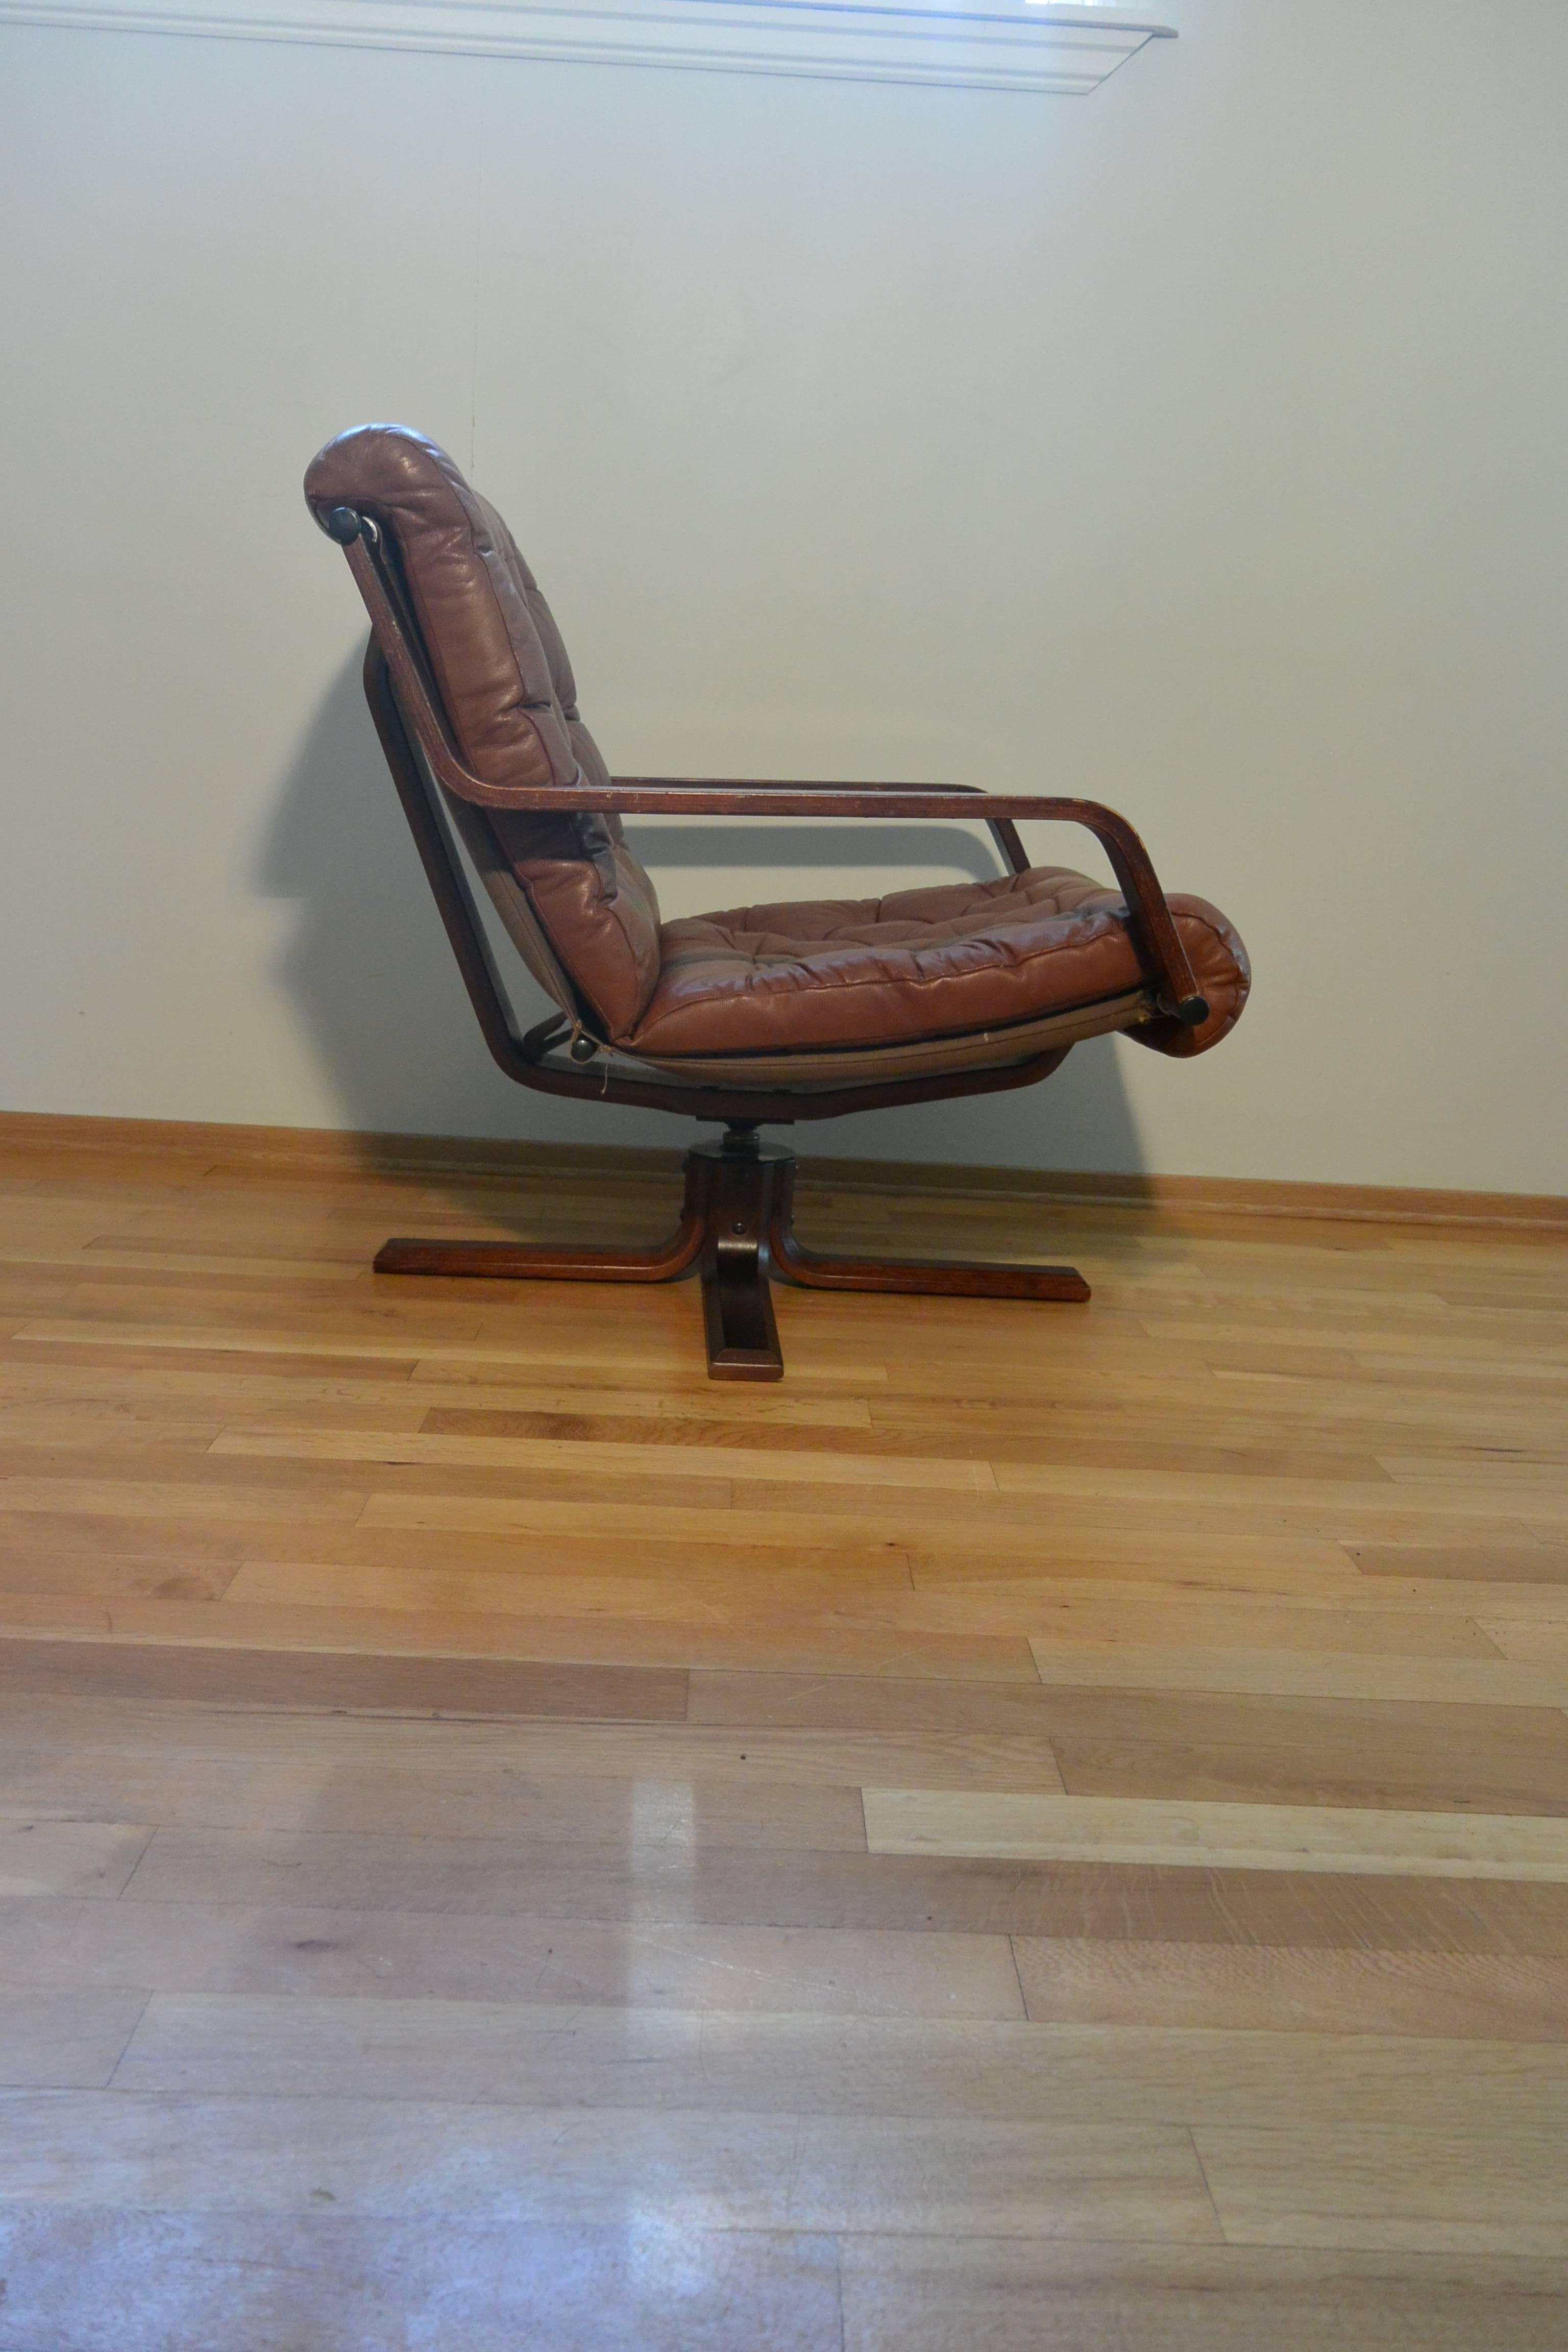 A rare woodman swivel chair in cognac leather, price includes matching footstool. Excellent condition 1975 designed by Sigurd Ressell the designer of the Falcon chair, manufactured by Vatne Møbler, Norway. 

A rare gem confirmed from the Vatne